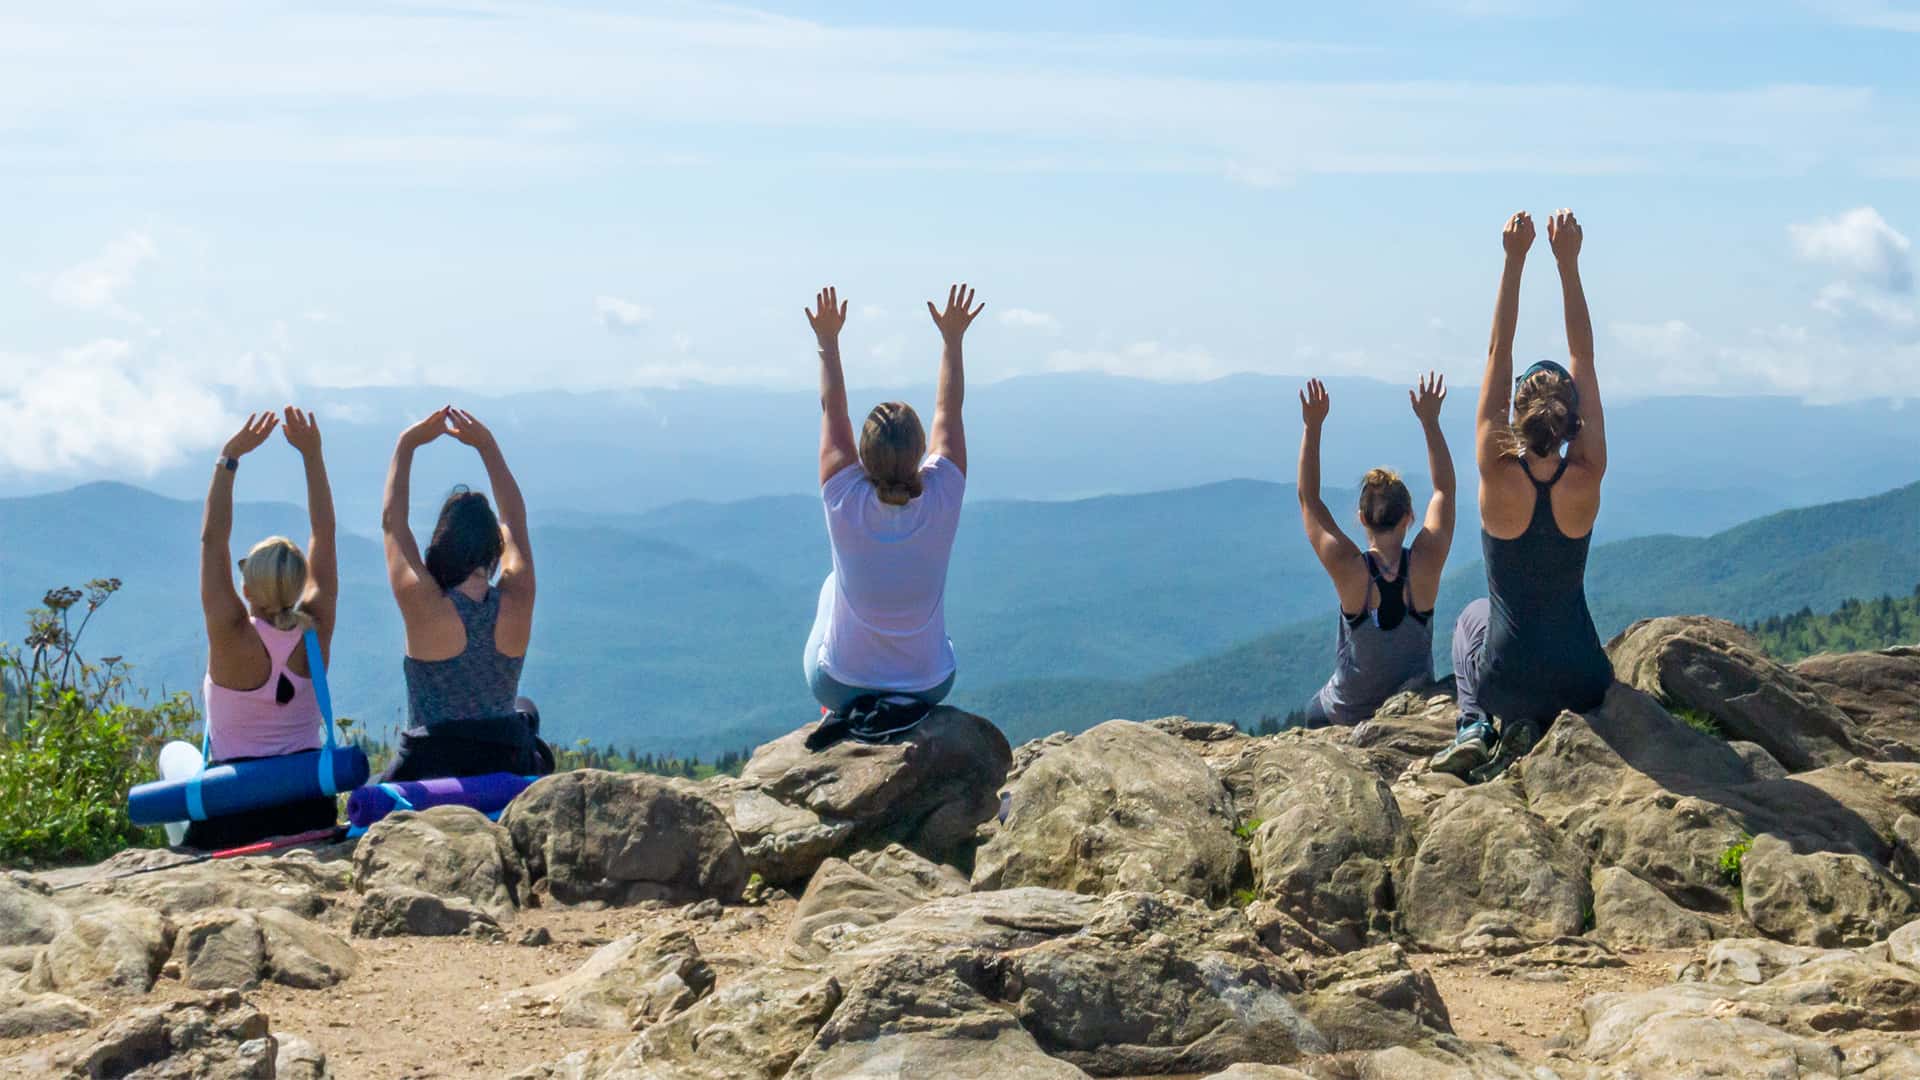 Yoga hike on rock outcrop in Gerton, NC.